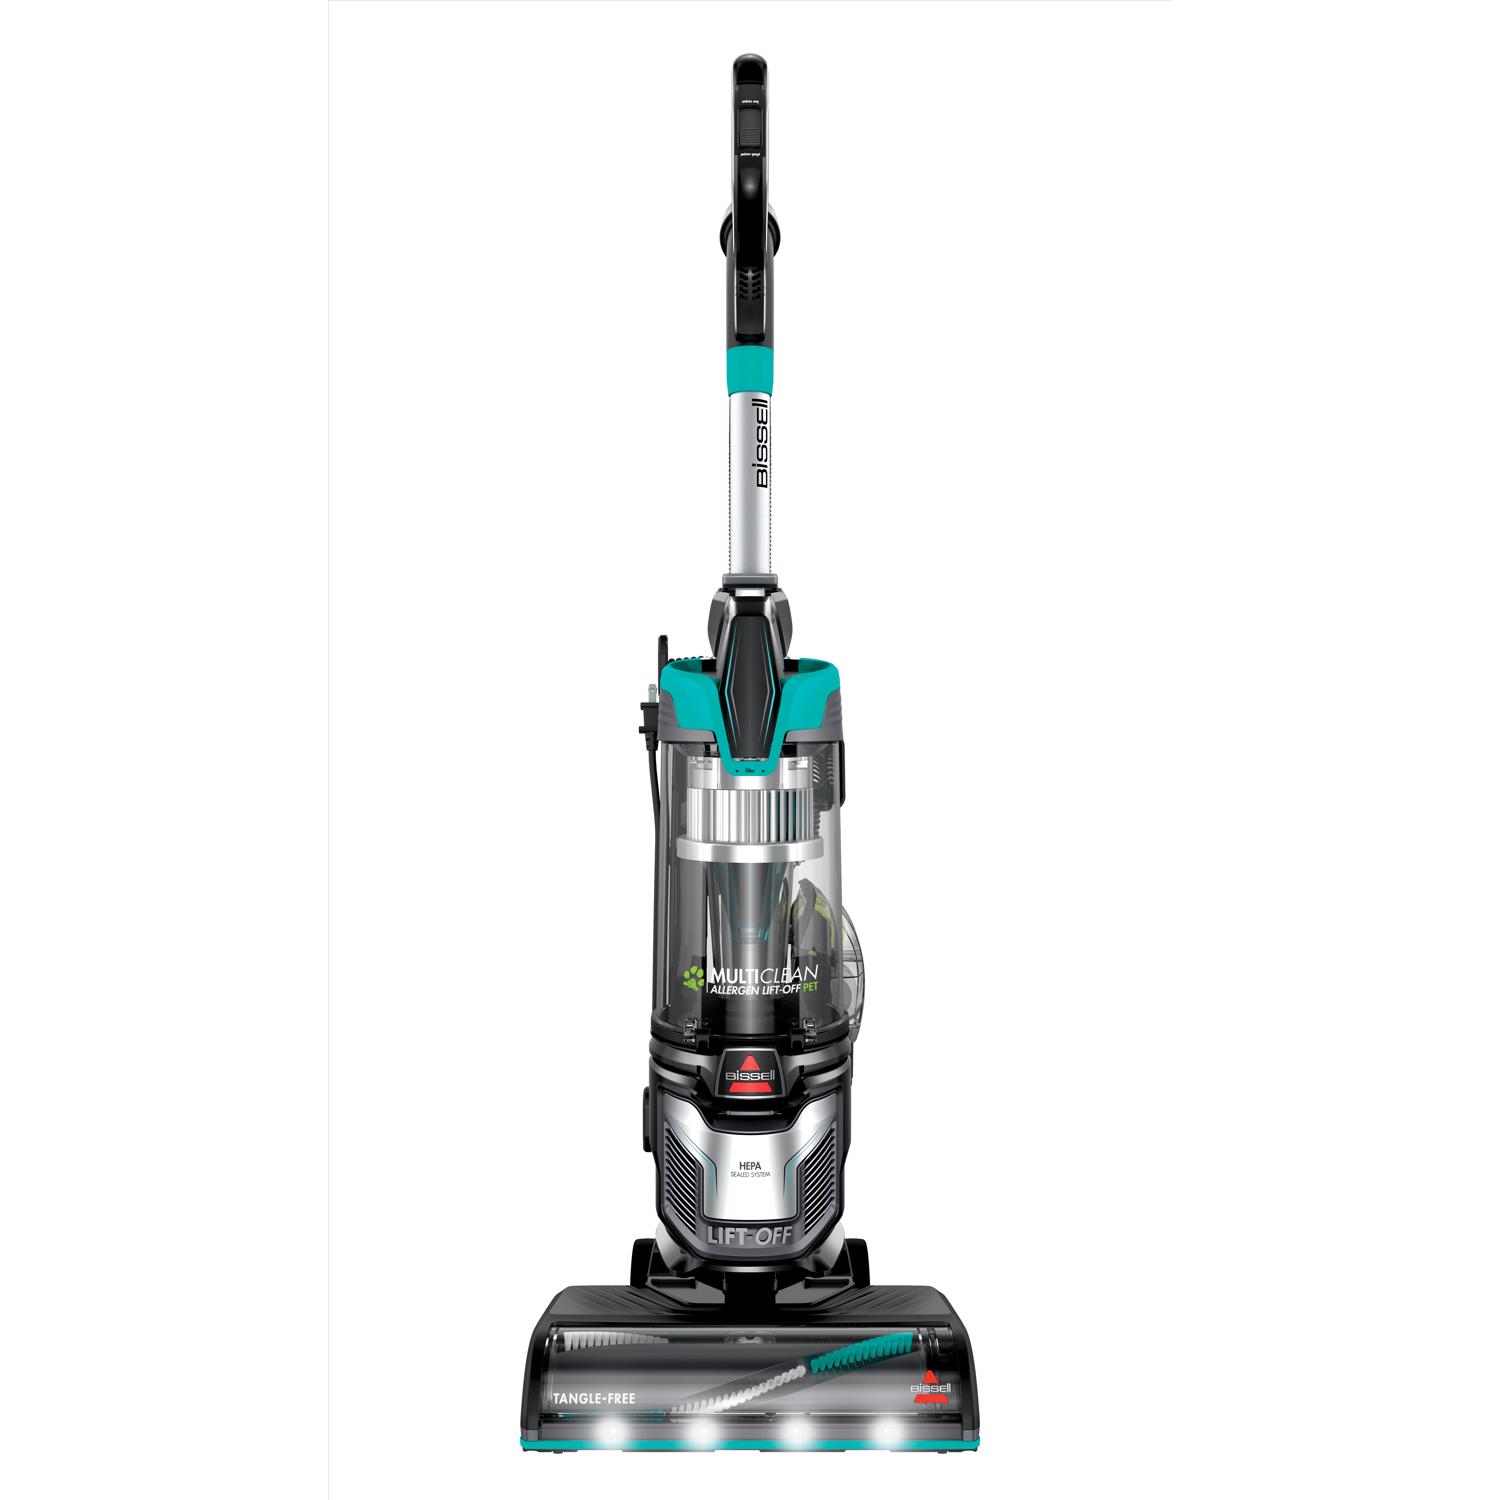 Photos - Vacuum Cleaner BISSELL MultiClean Bagless Corded Cyclonic Filter Upright Vacuum 2852 